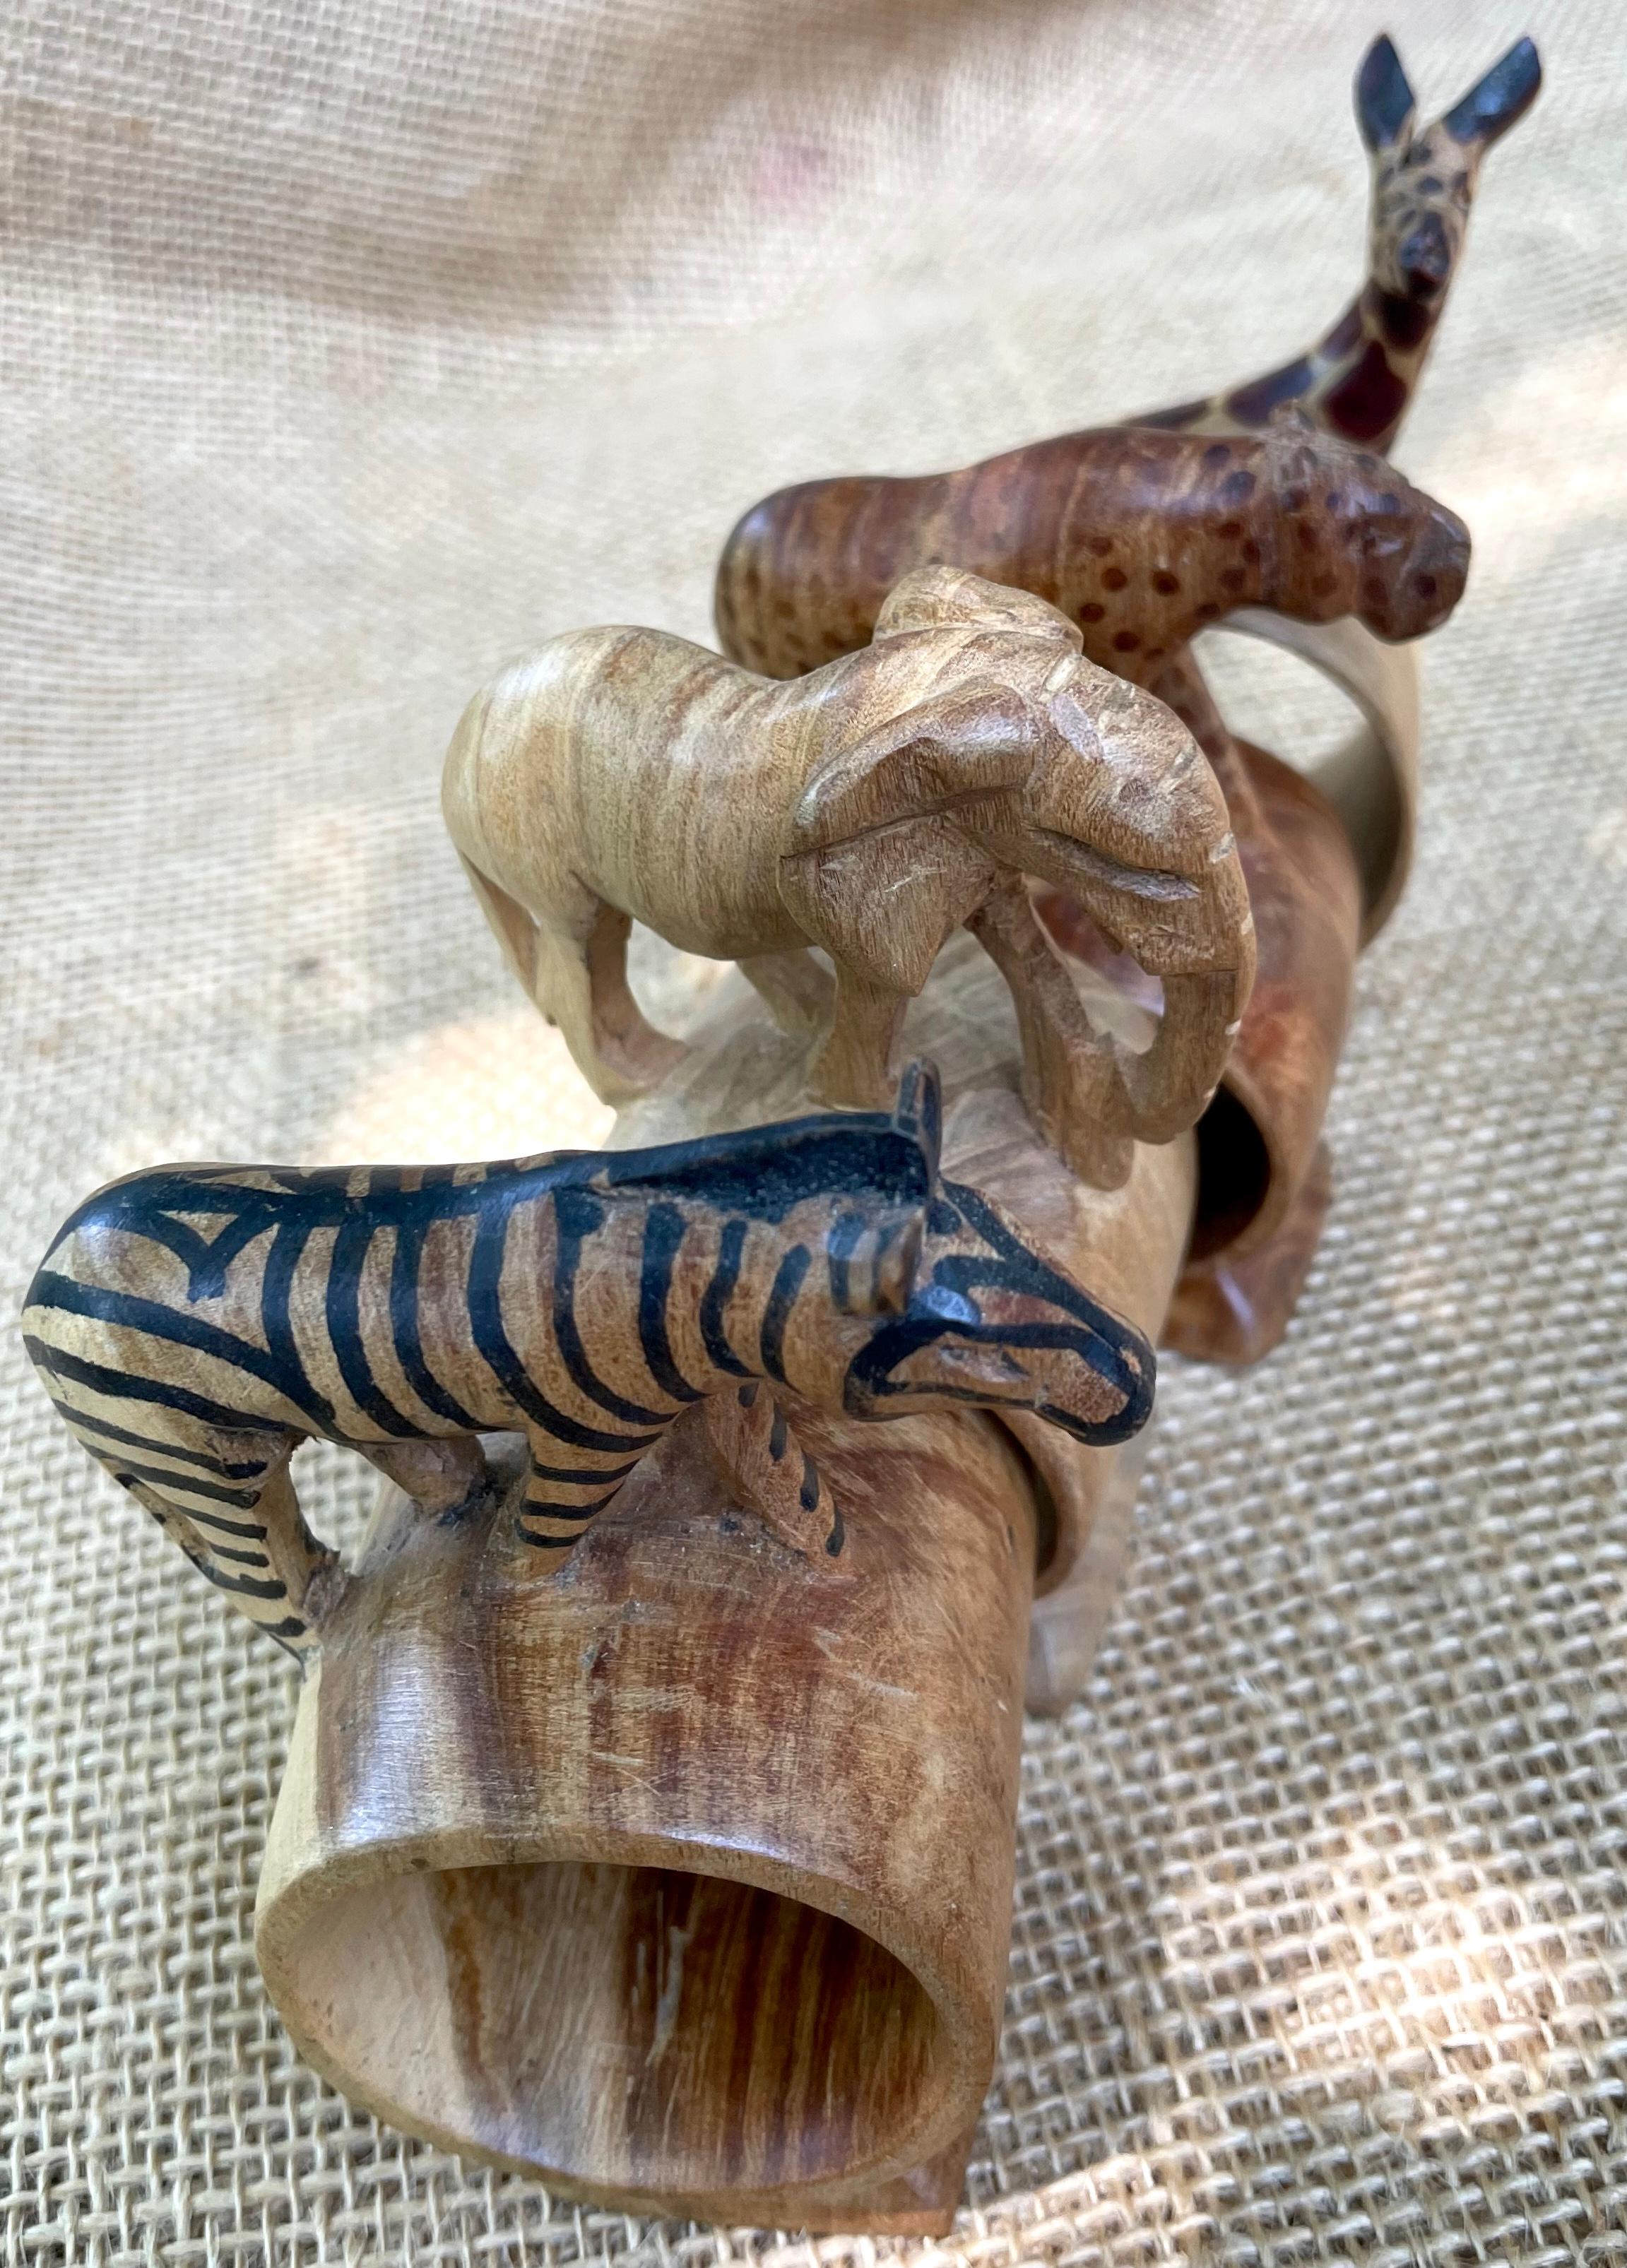 Set of four African Safari napkin rings. Hand carved and stained olive wood figures with integrated napkin rings from Kenya. Elephant, zebra, leopard and giraffe. Africa, Midcentury
Dimensions: 4” H x 2.5” W x 1.5” D.